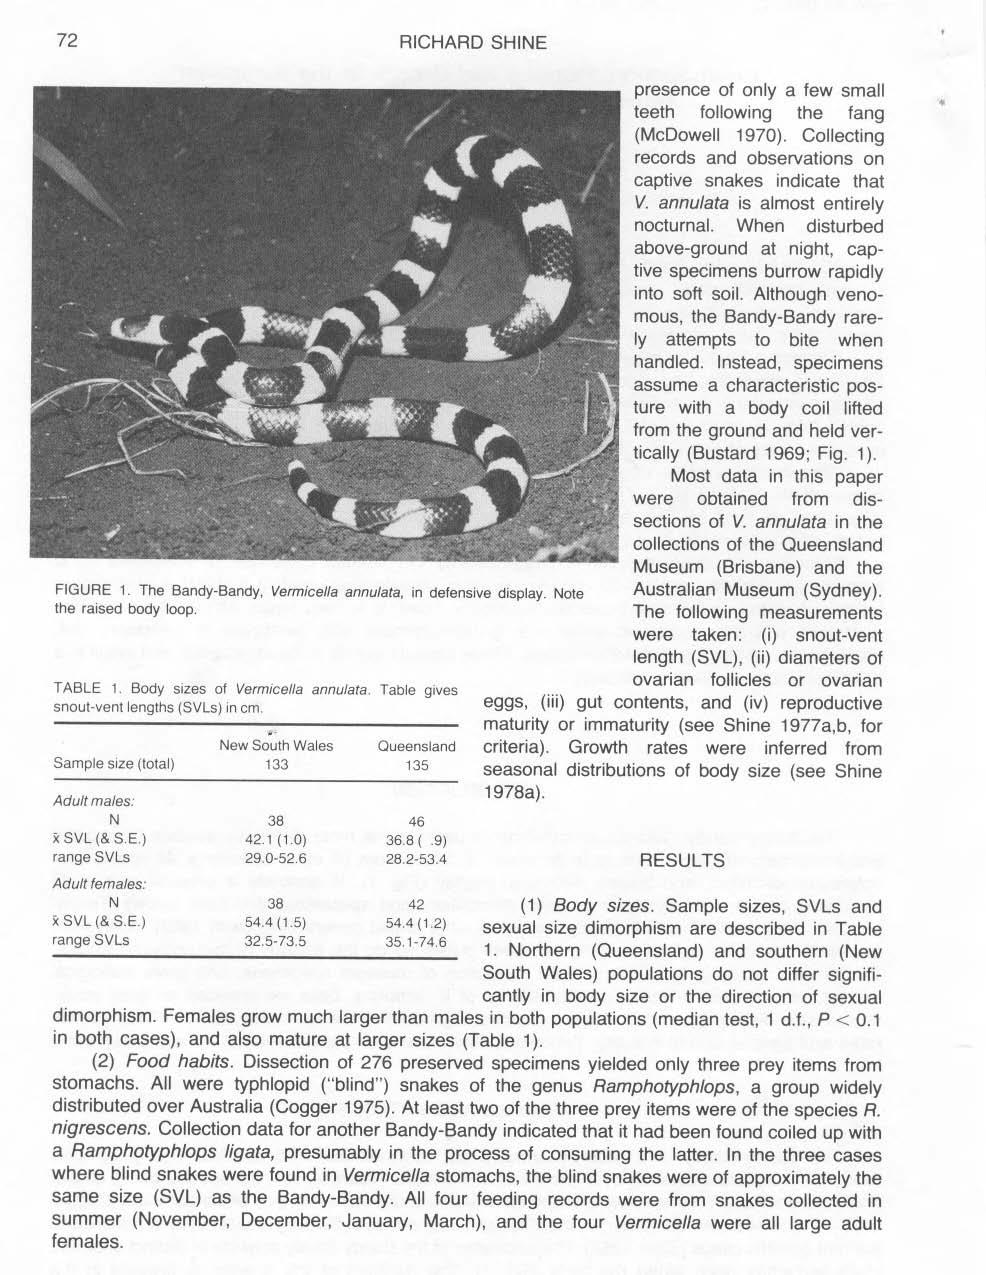 72 RICHARD SHINE FIGURE 1 The Bandy-Bandy, Vermicella annulata, in defensive display Note the raised body loop TABLE 1 Body sizes of Vermicella annulata Table gives snout-vent lengths (SVLs) in cm